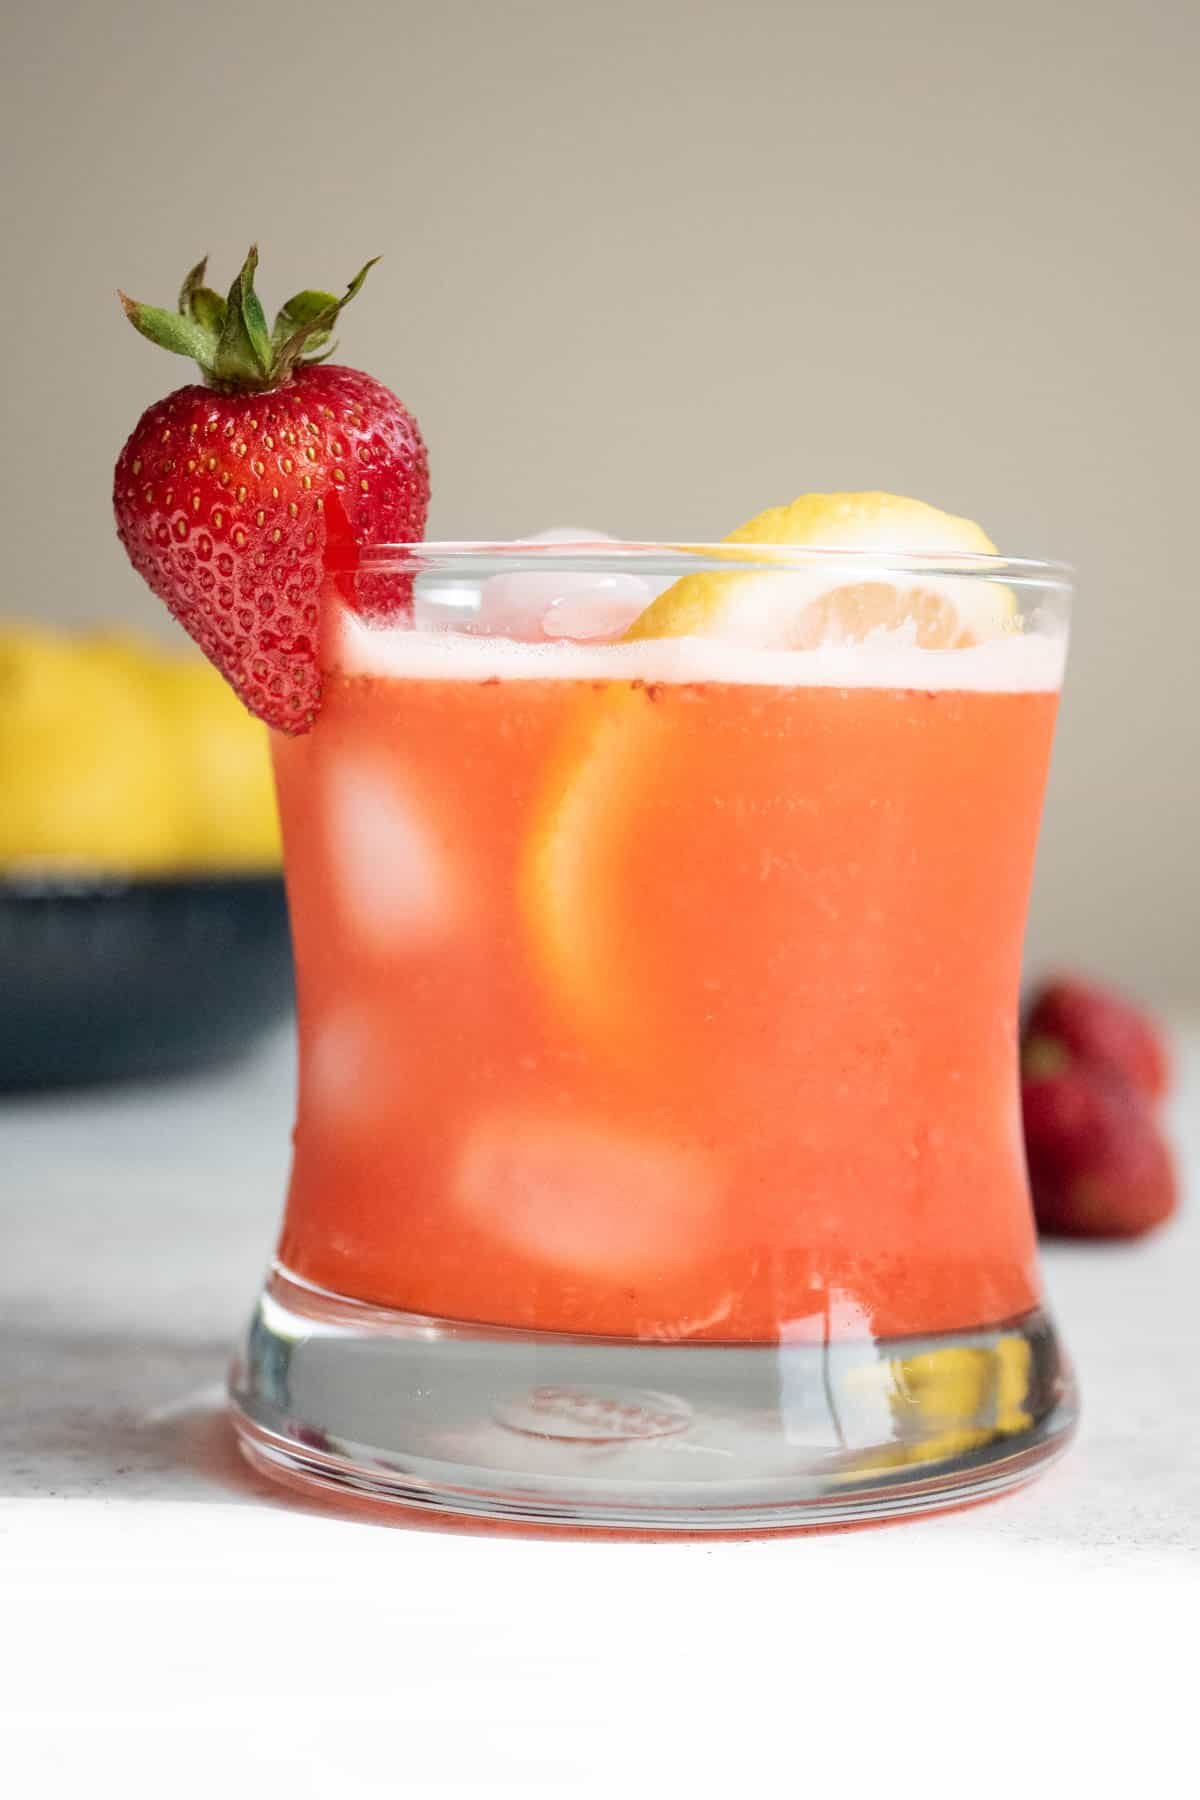 a glass of strawberry lemonade garnished with a strawberry and a lemon slice.